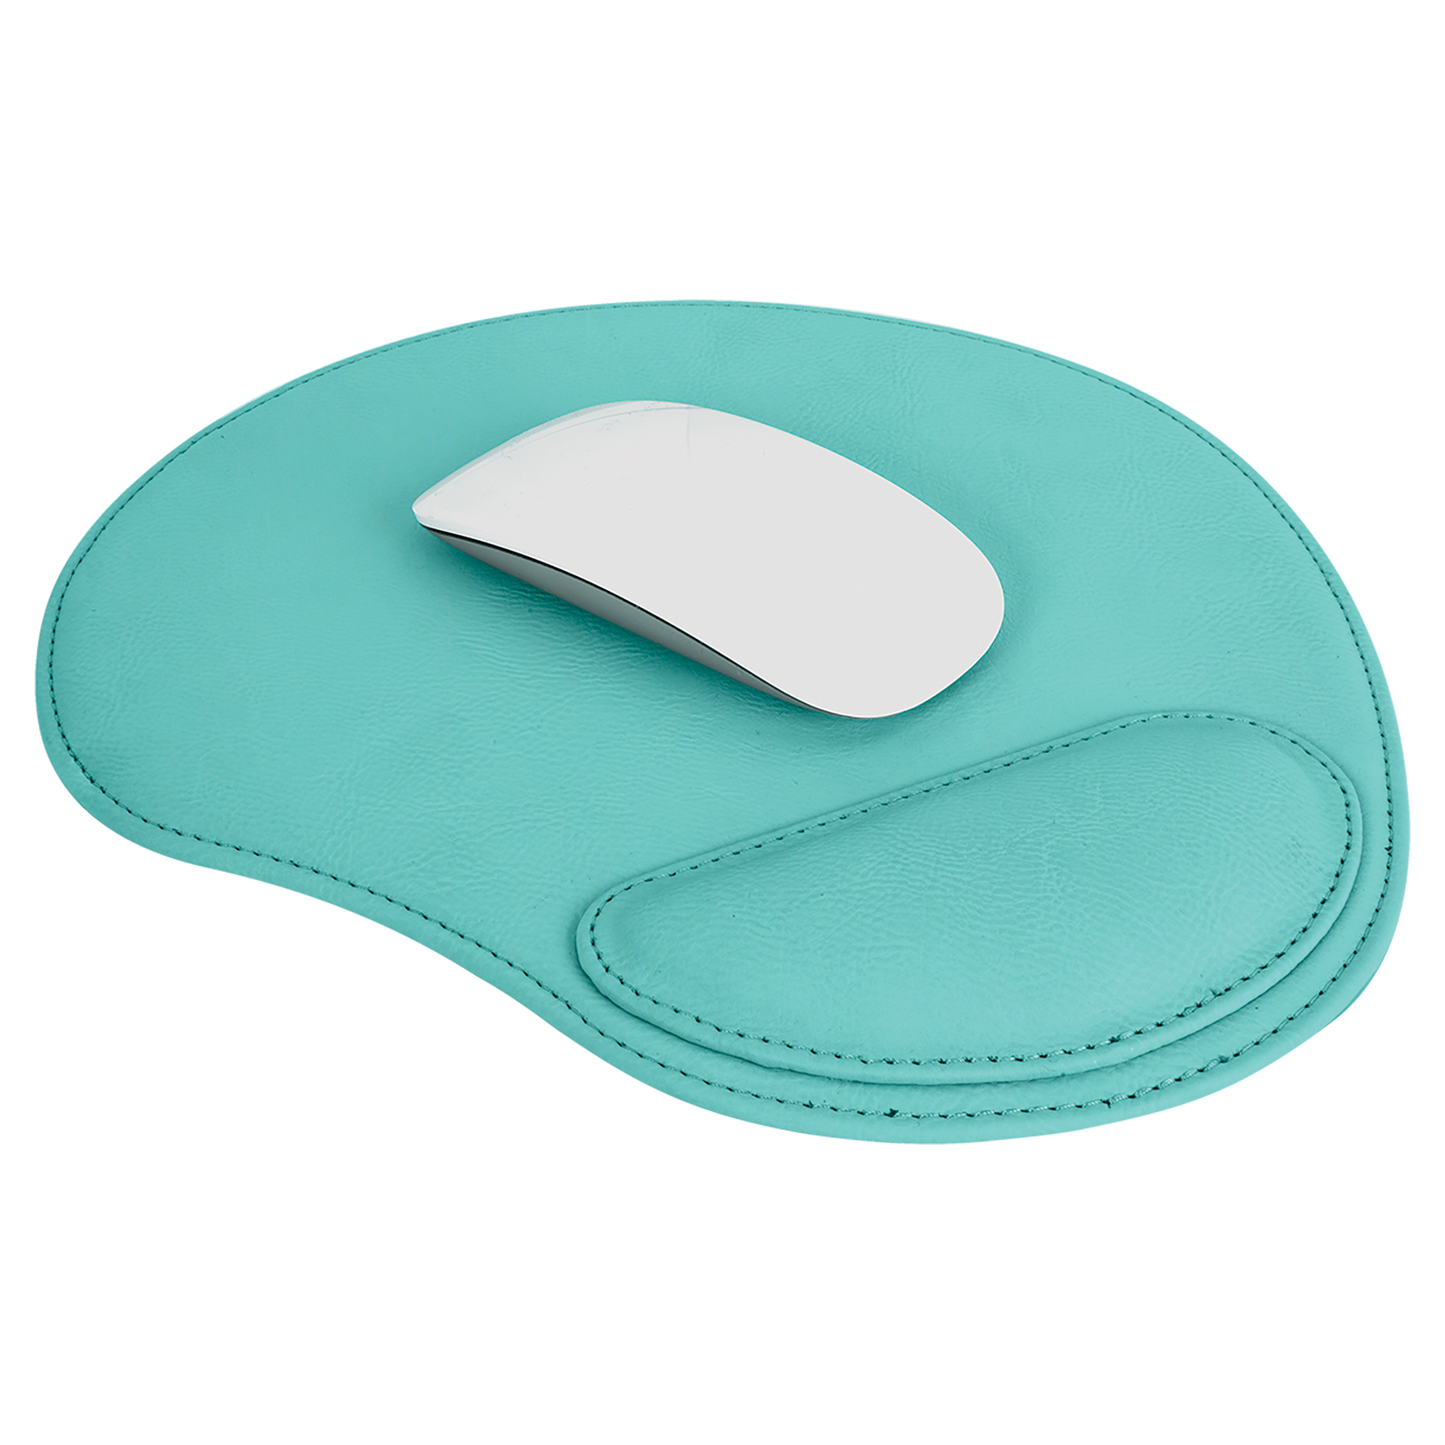 Custom Engraved 9" x 10 1/4" Teal Leatherette Mouse Pad